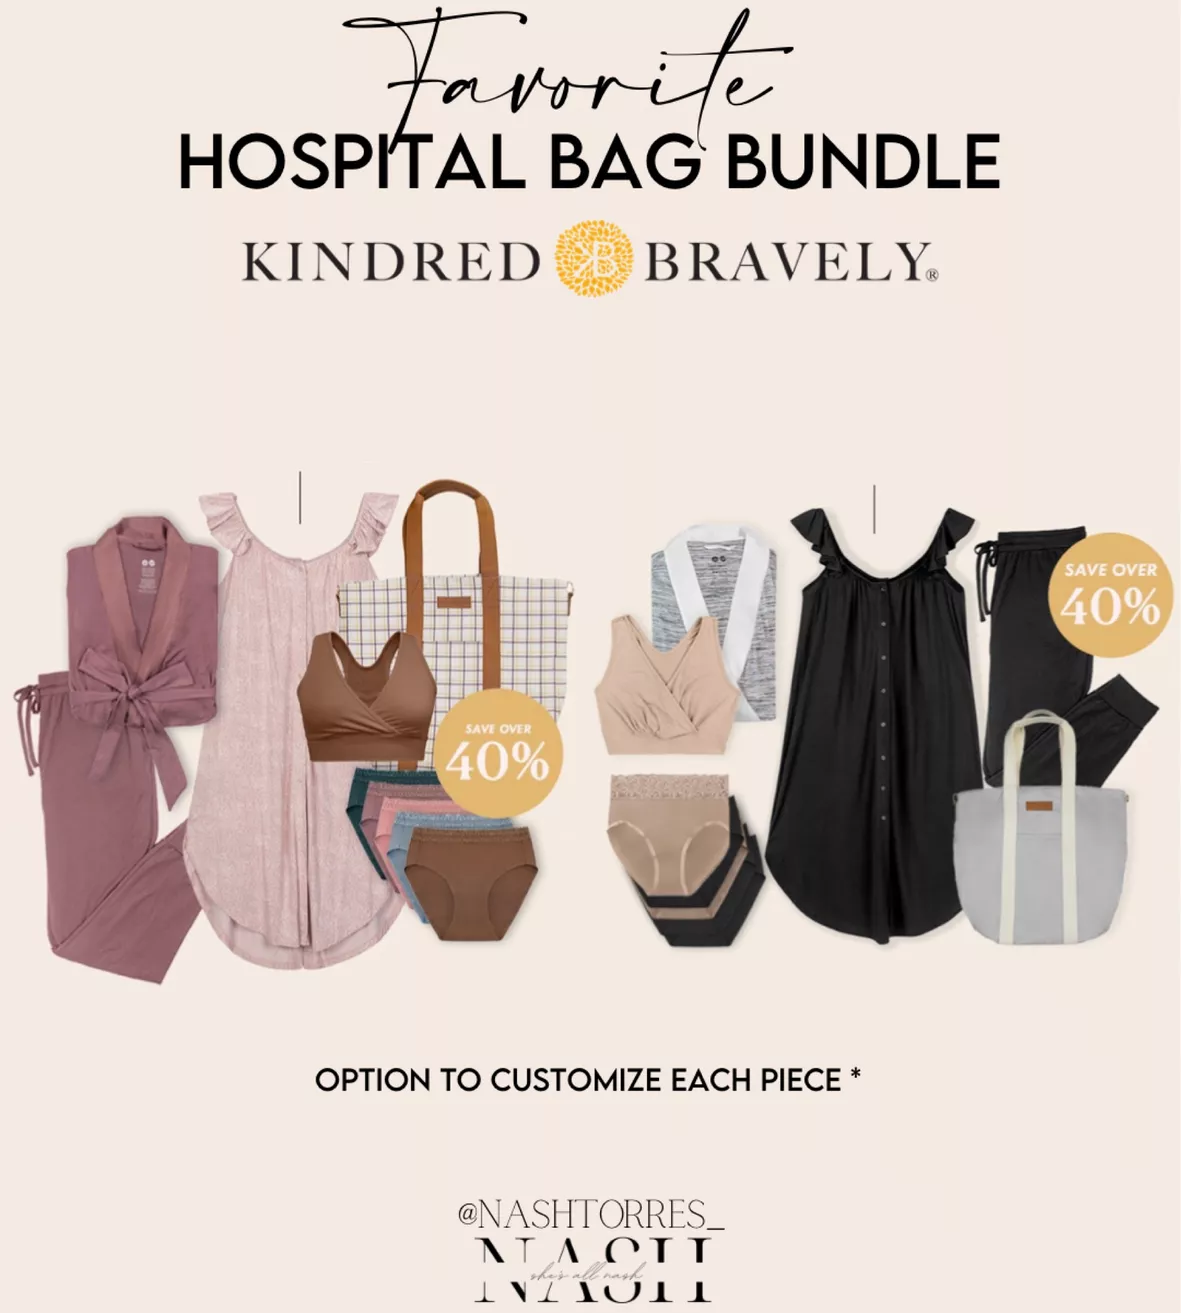 Kindred Bravely - Look what arrived before its due date! 👀⁠ ⁠ Save over  40% with the Pack-Your-Bag Hospital Bundle! This must-have bundle has EIGHT  essential pieces (including our fan-favorite Florence Tote